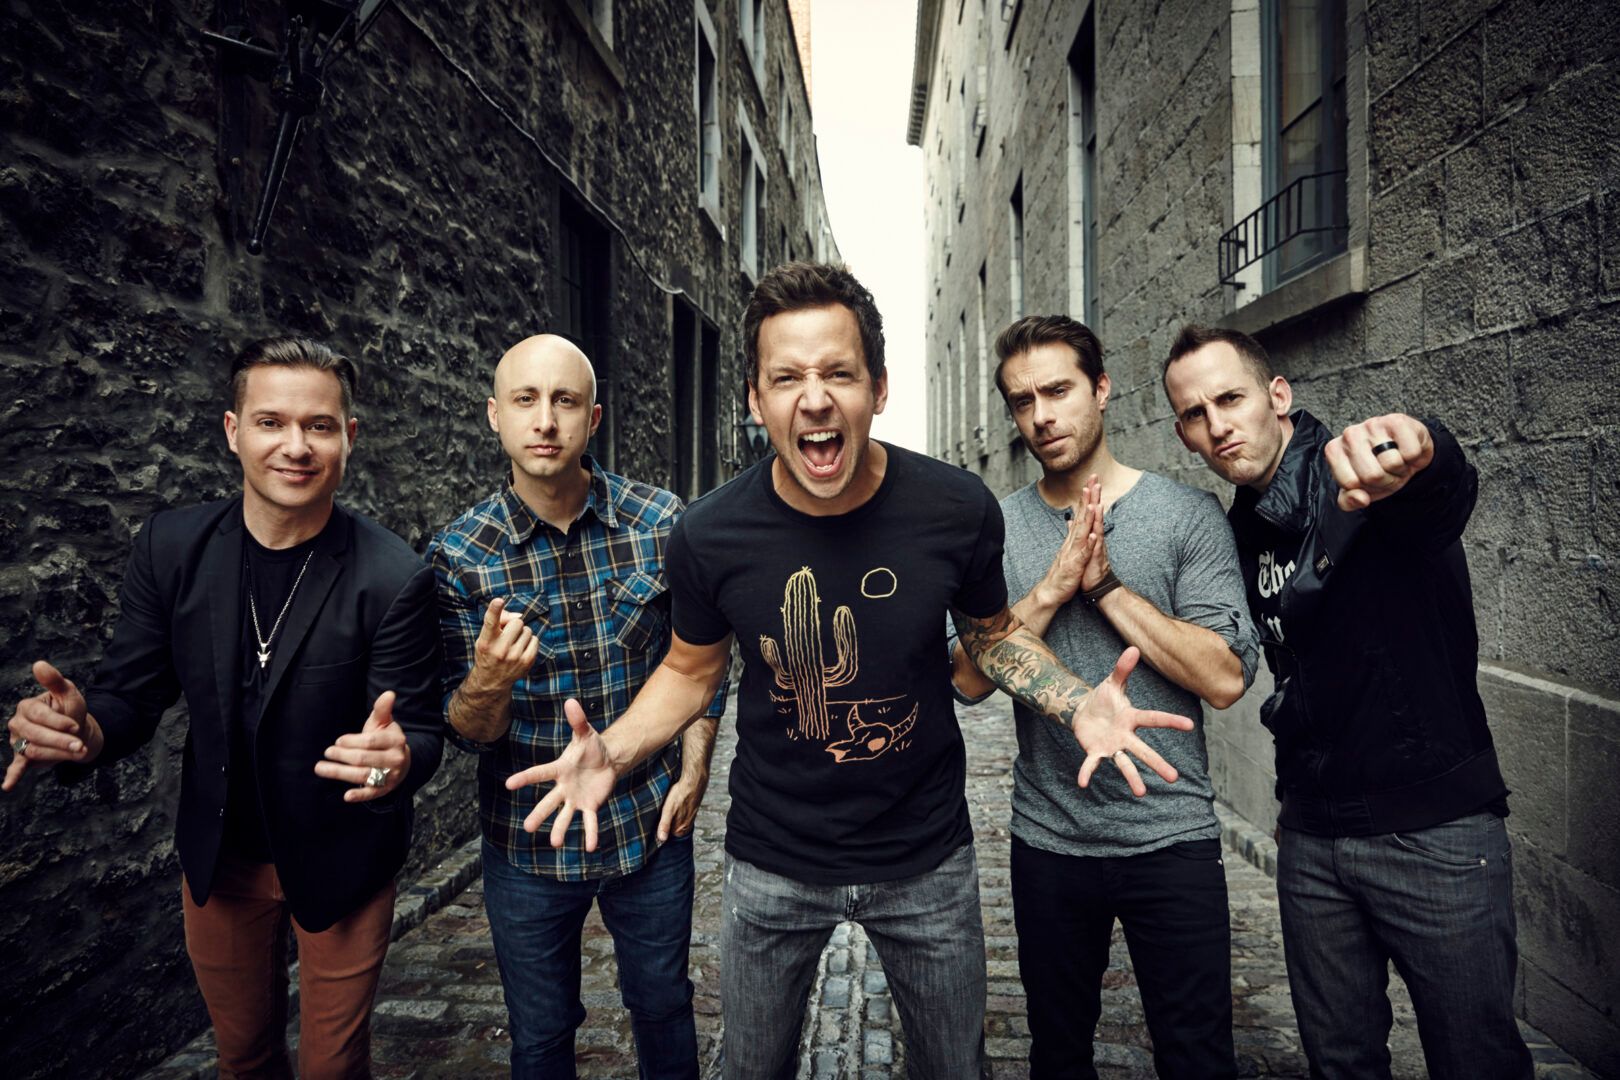 Simple Plan Announce U.S. Leg of the “Taking One For The Team Tour”